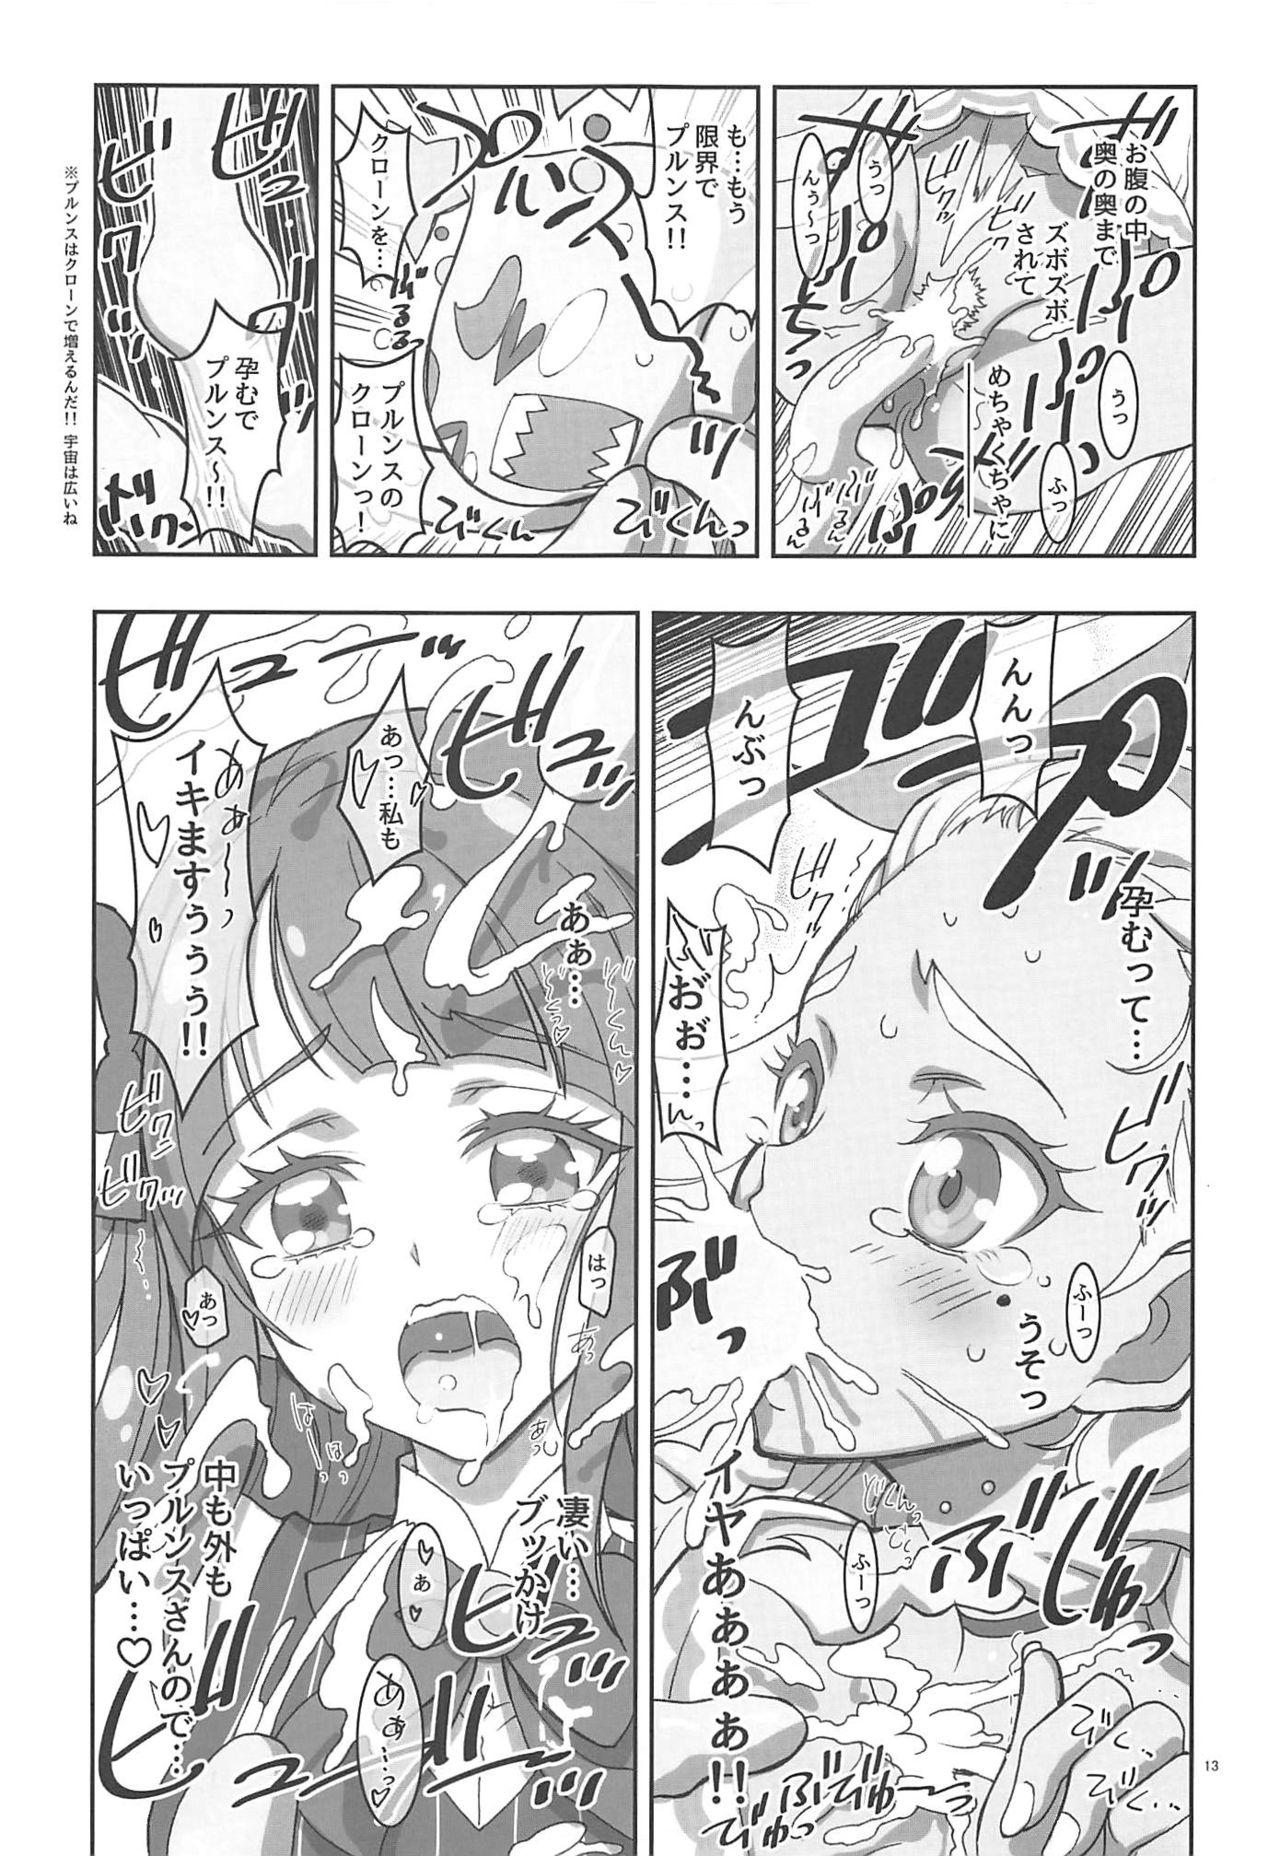 Maledom SPACE RUN AWEY - Star twinkle precure Mum - Page 12